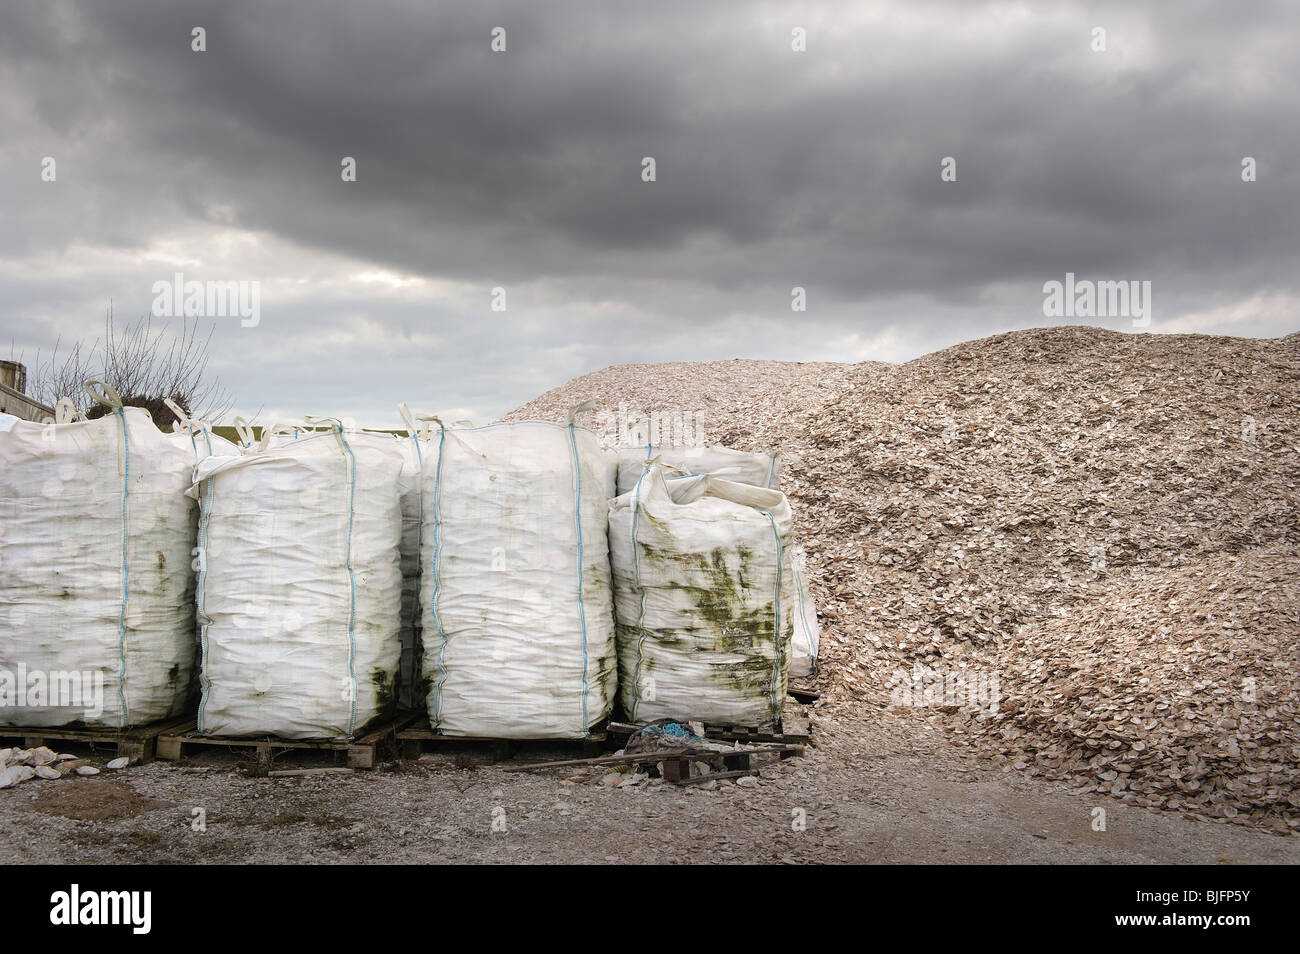 Waste scallop shells before being dumped at sea, Kirkcudbright, SW Scotland Stock Photo